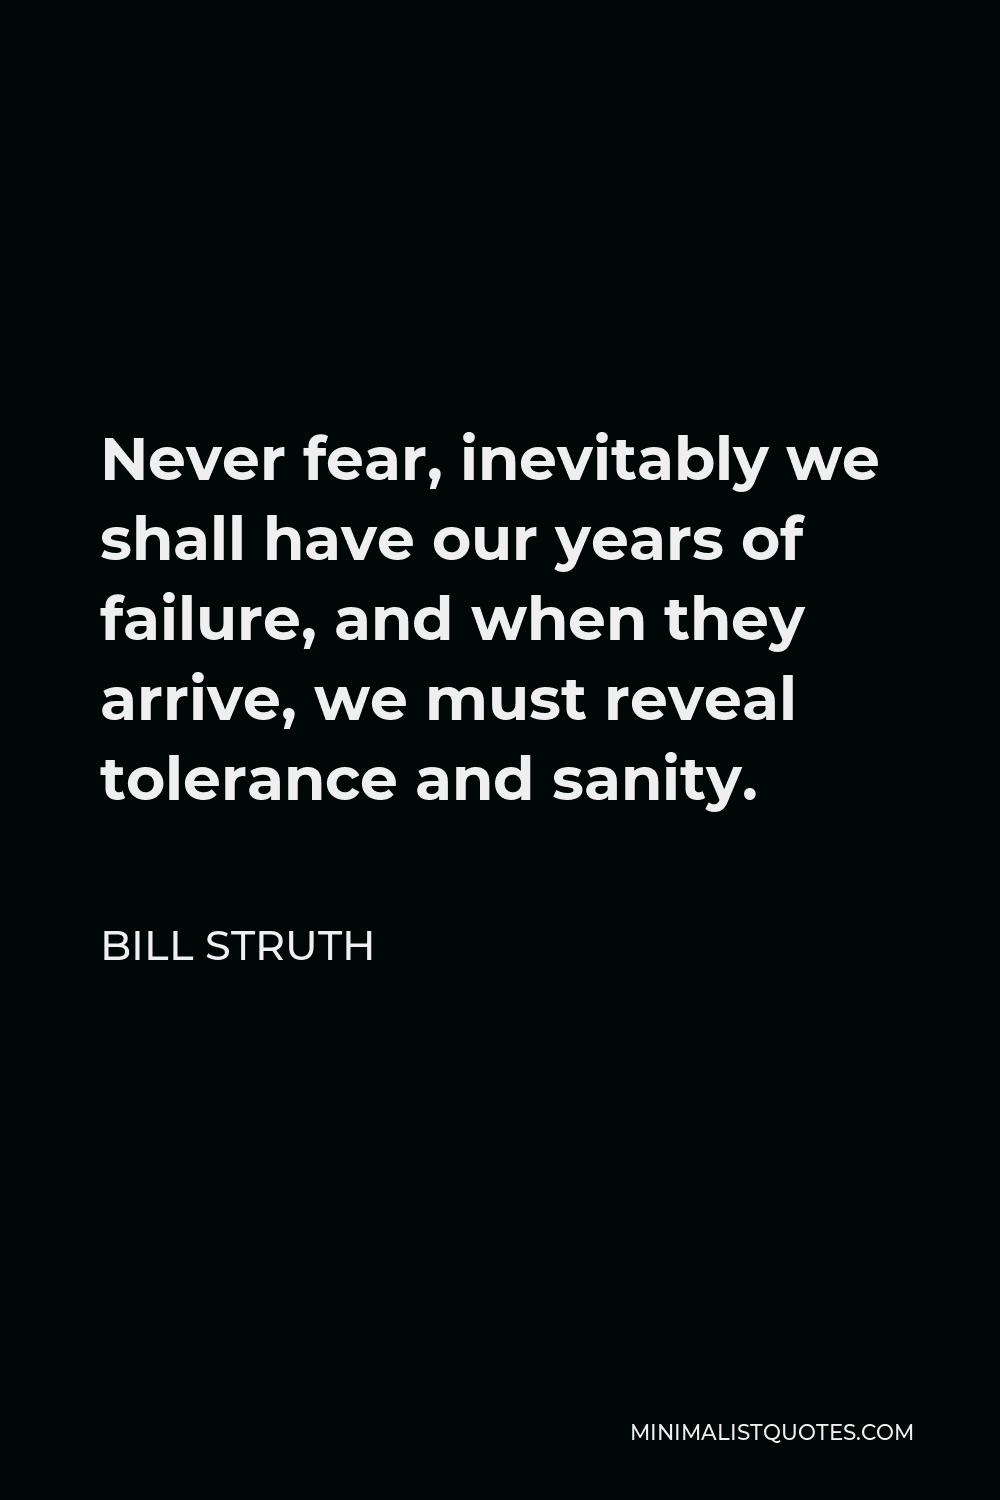 Bill Struth Quote - Never fear, inevitably we shall have our years of failure, and when they arrive, we must reveal tolerance and sanity.